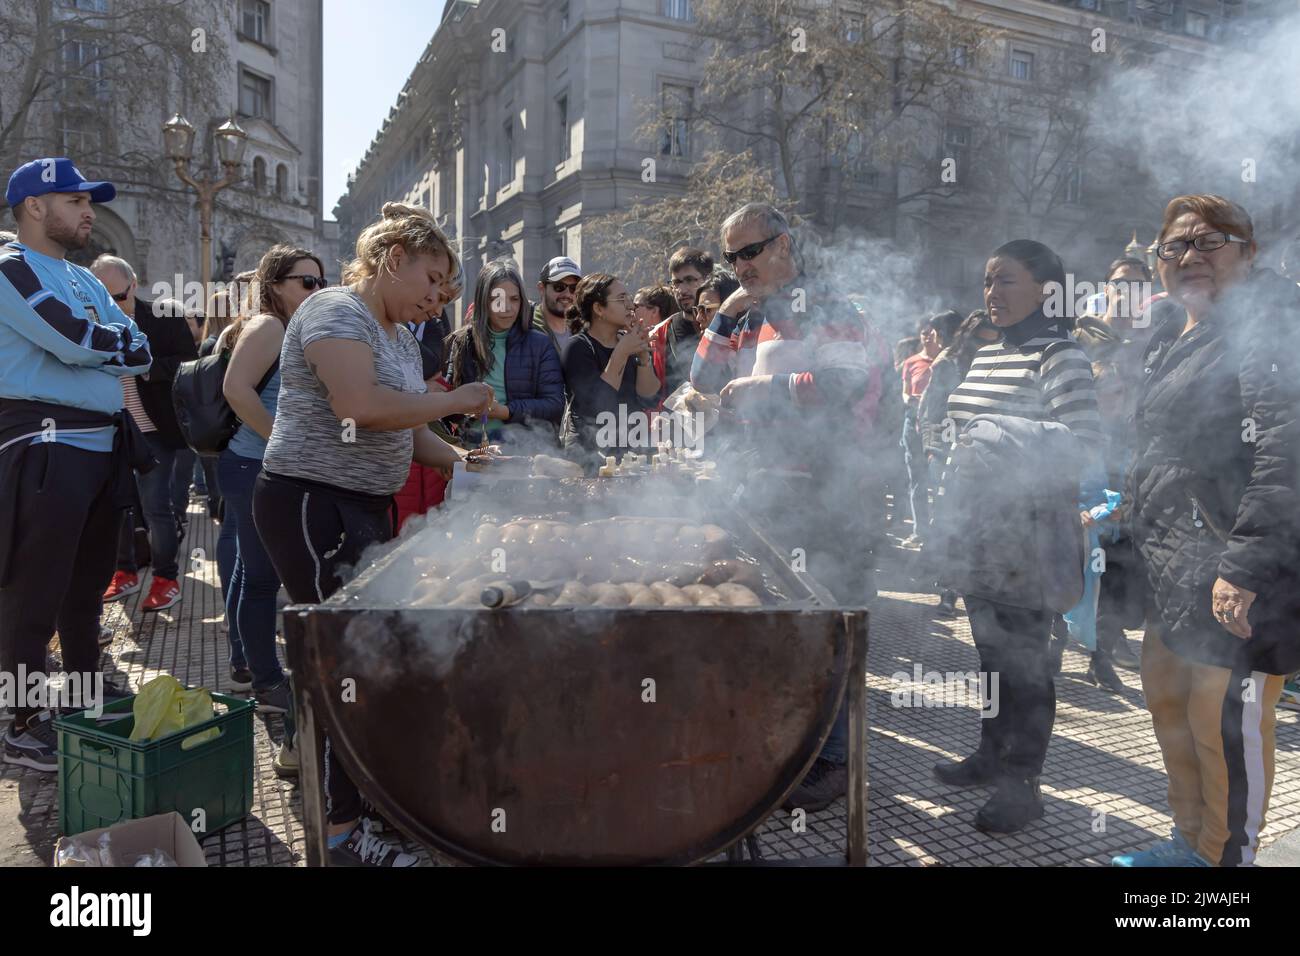 Buenos Aires, Argentina - September 2nd, 2022: Street food stall in a demonstration in the Plaza de Mayo. Stock Photo